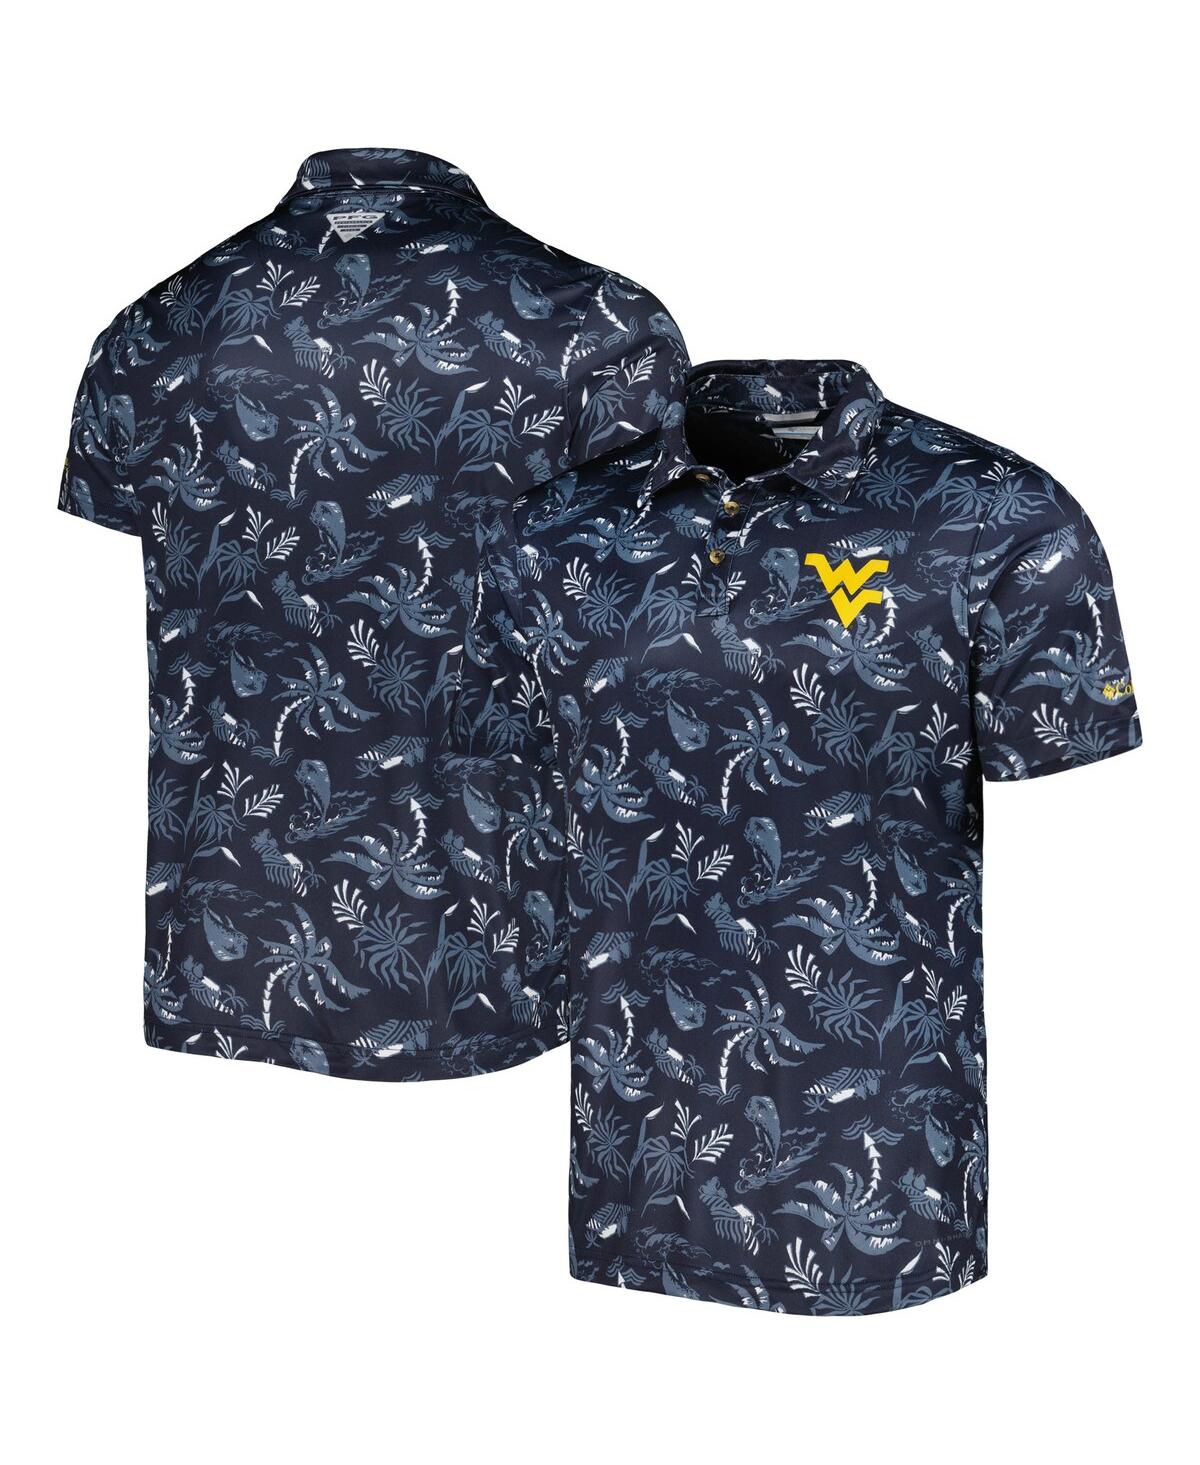 Men's Columbia Navy West Virginia Mountaineers Super Terminal Tackle Omni-Shade Polo Shirt - Navy